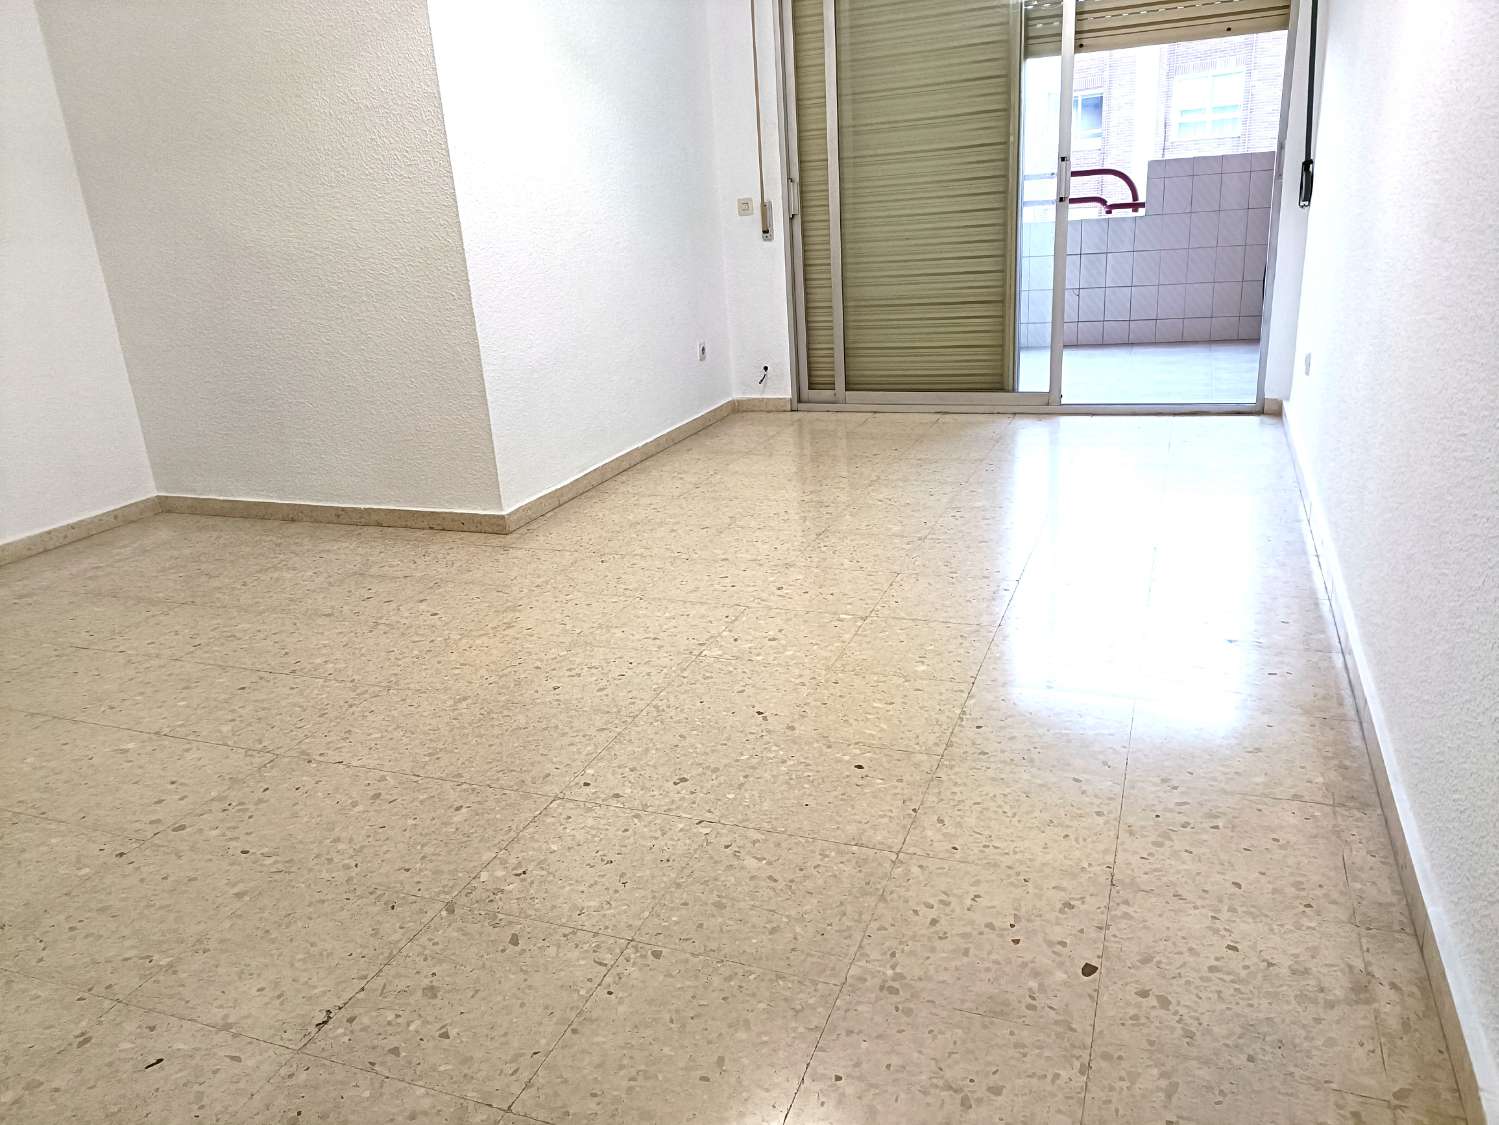 4 ROOM APARTMENT FOR SALE WITH GARAGE SPACE